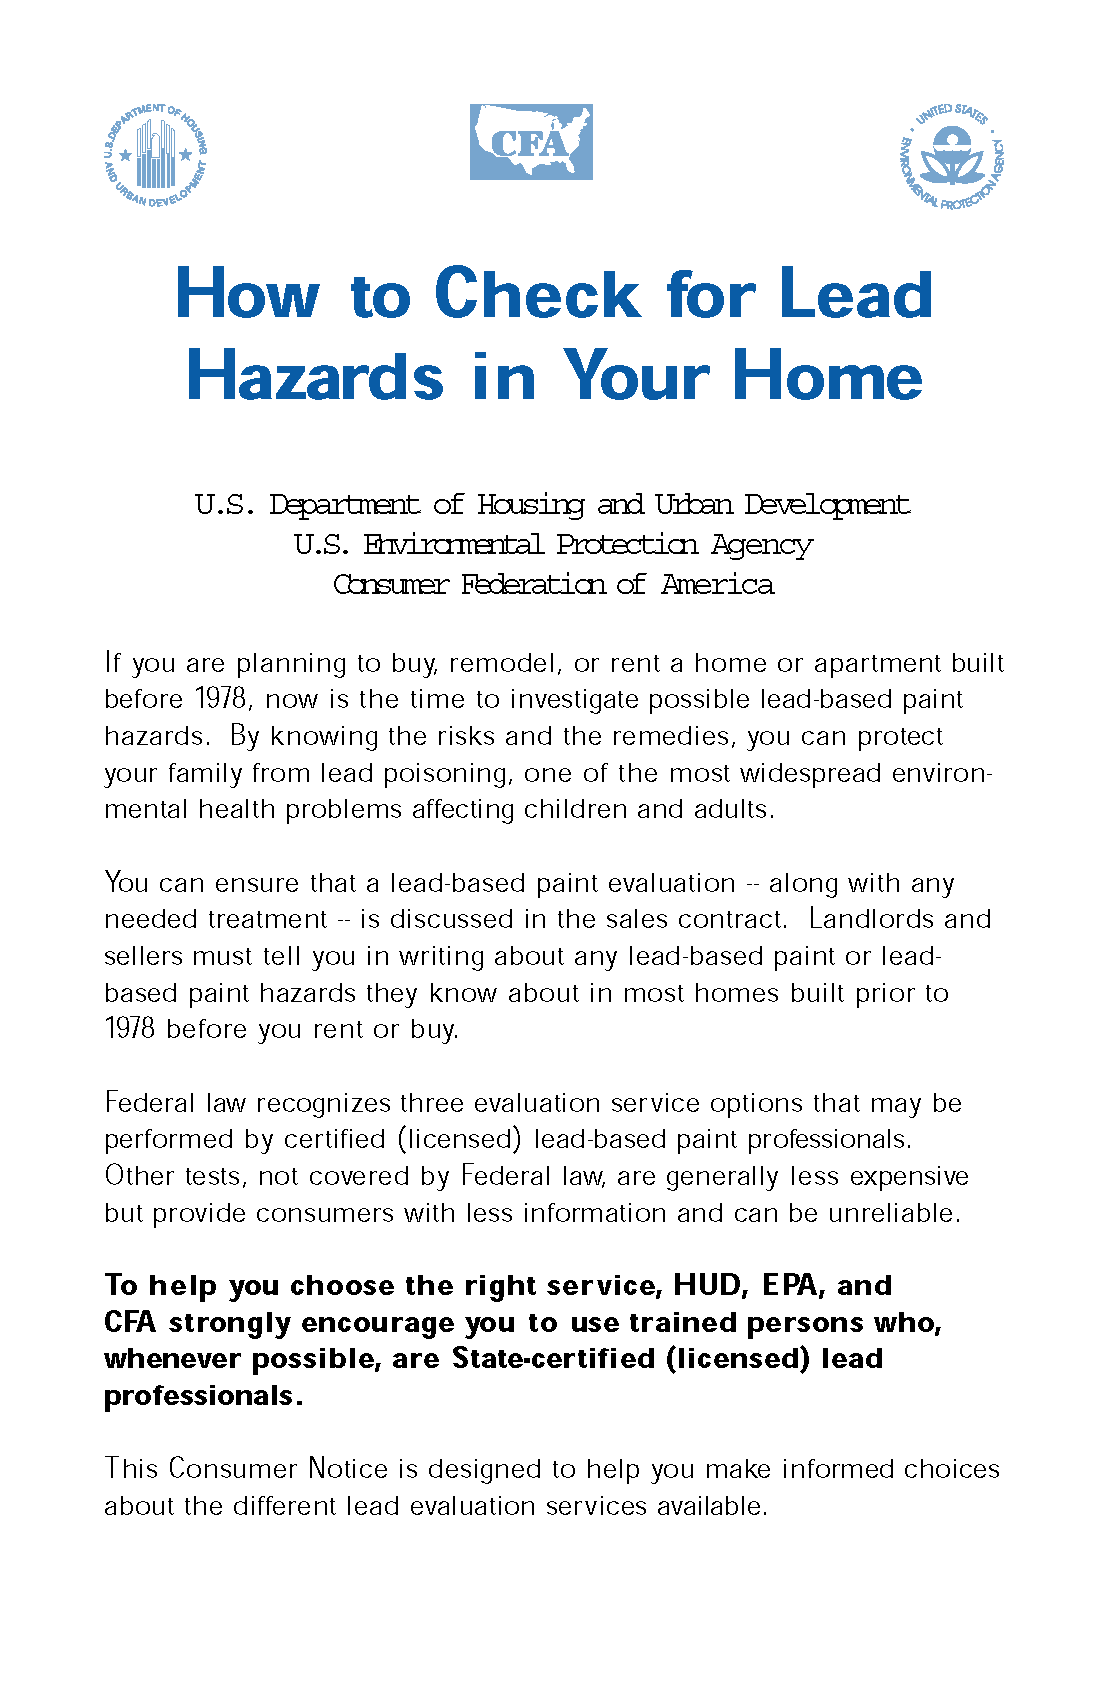 HOw to Check for Lead Hazards in Your Home